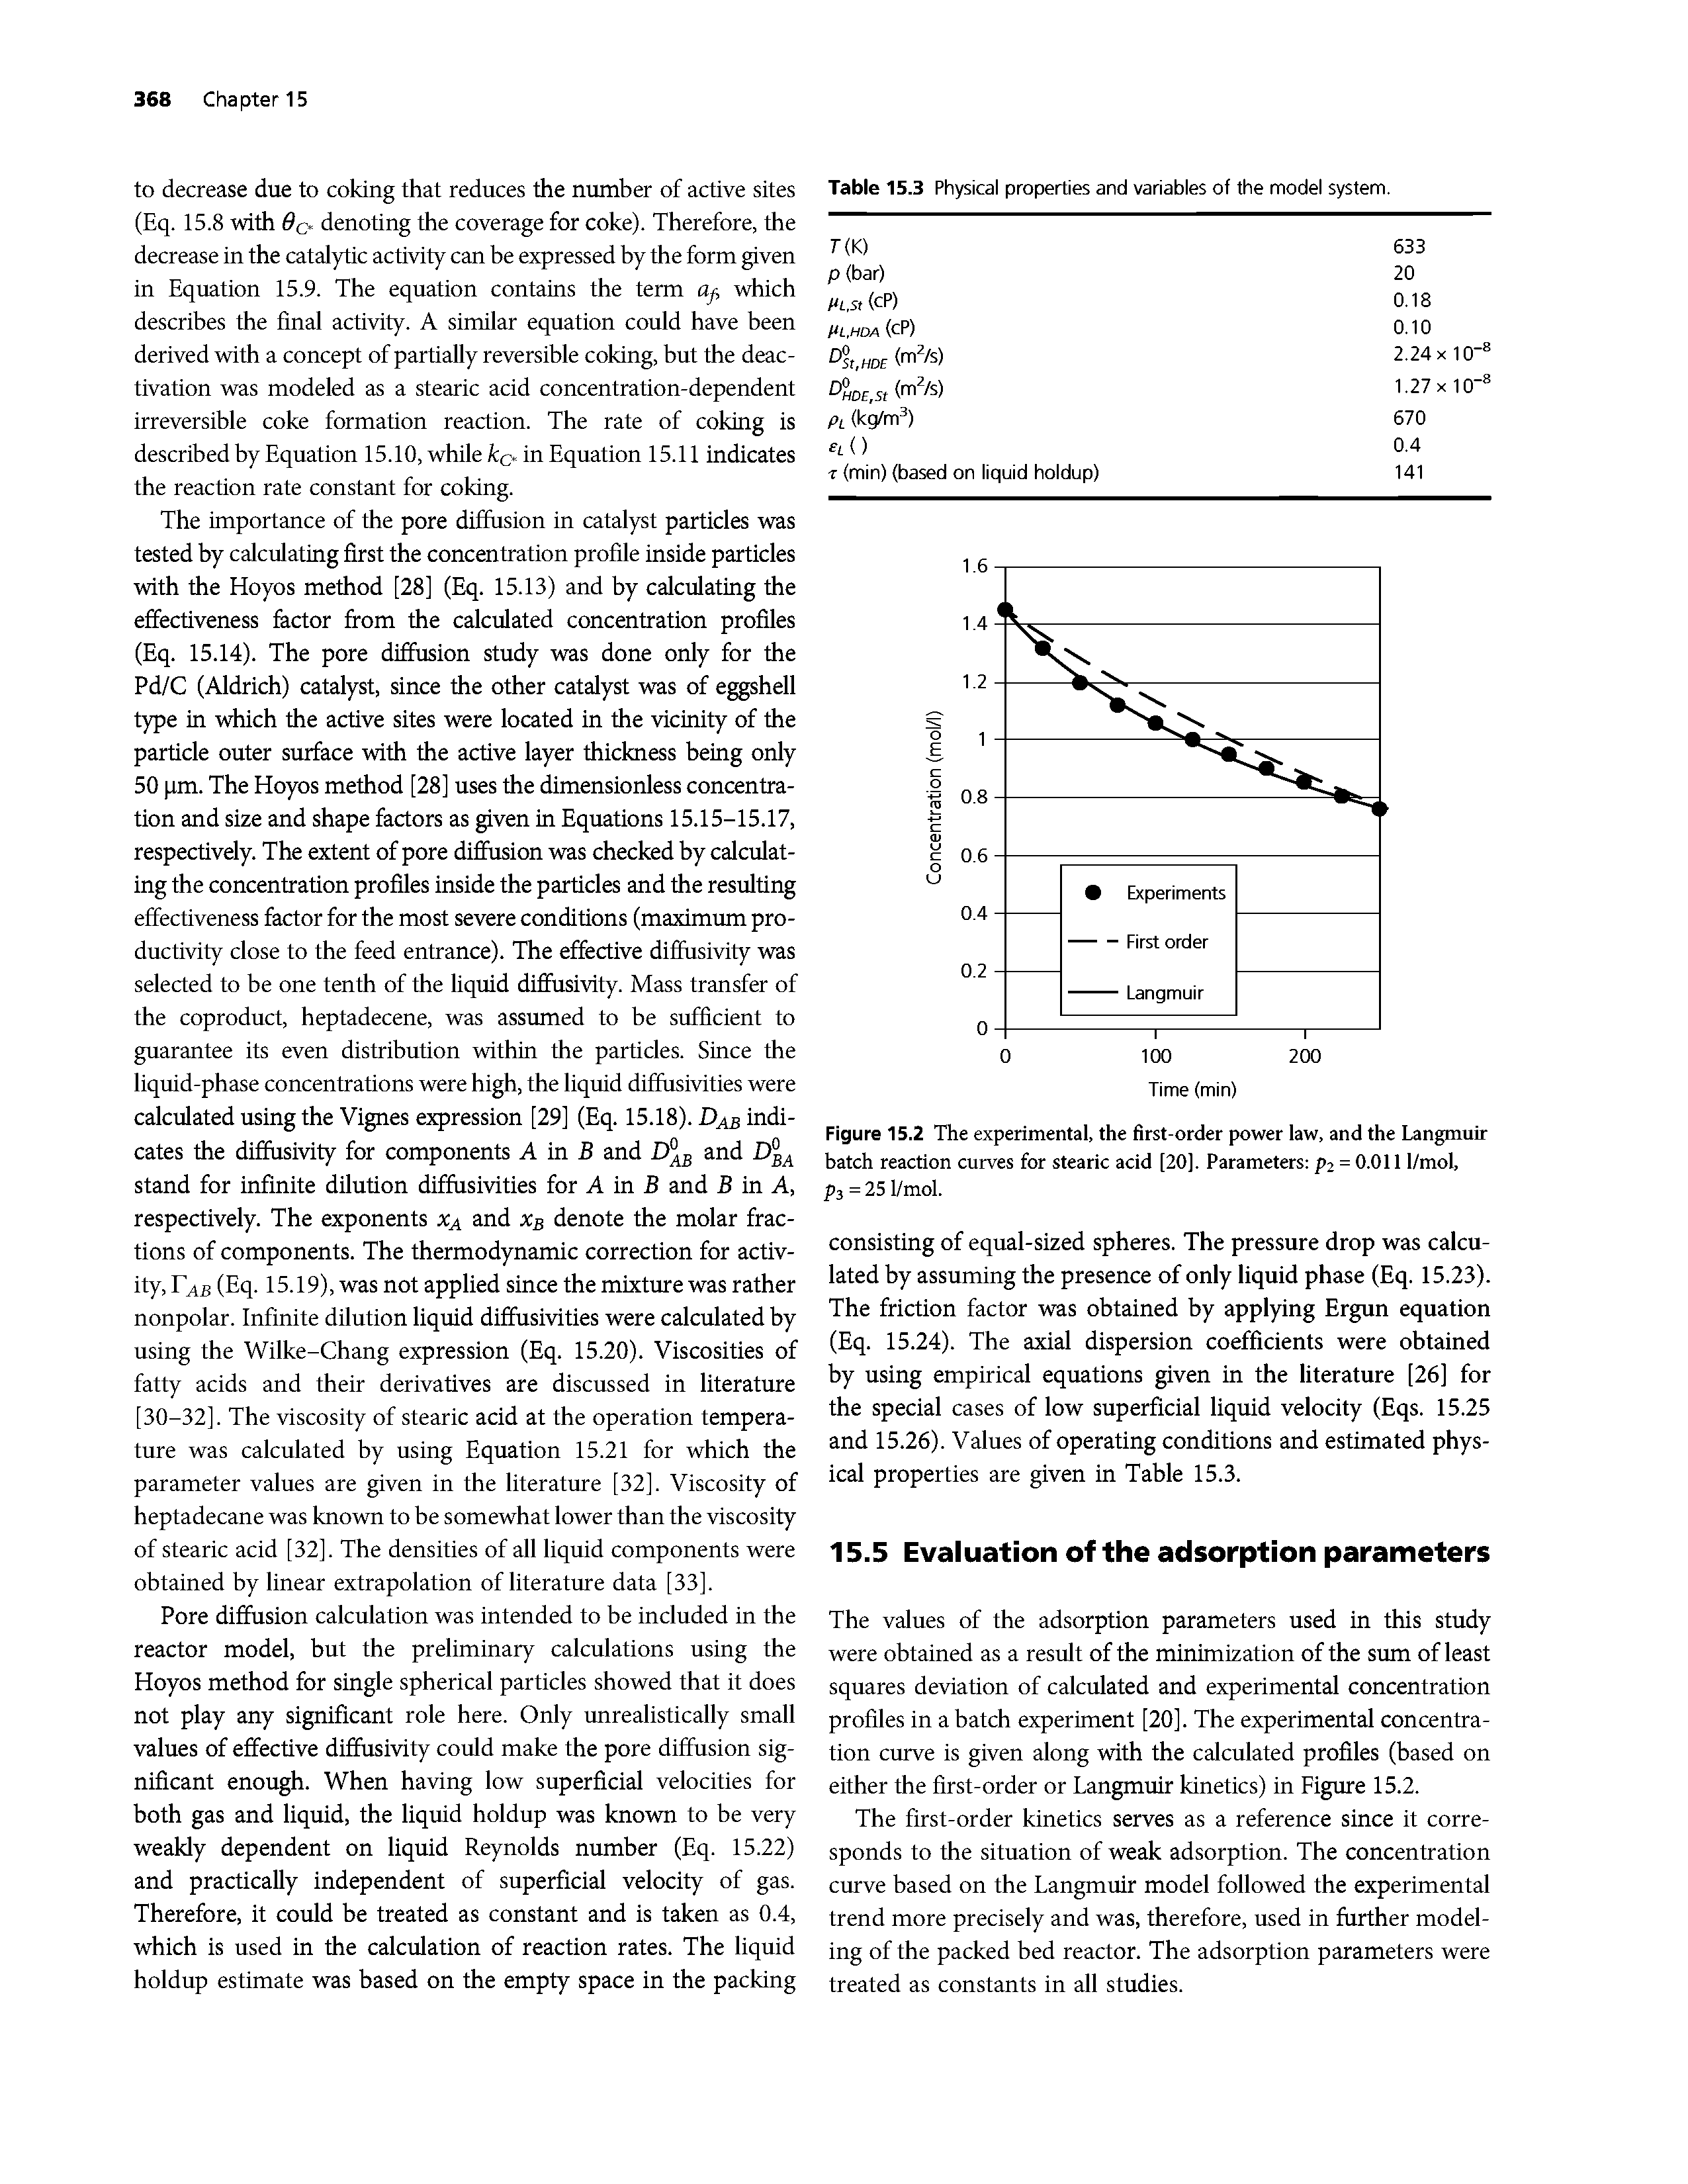 Figure 15.2 The experimental, the first-order power law, and the Langmuir batch reaction curves for stearic acid [20]. Parameters p2 = 0.011 l/mol, p3 = 25 l/mol.